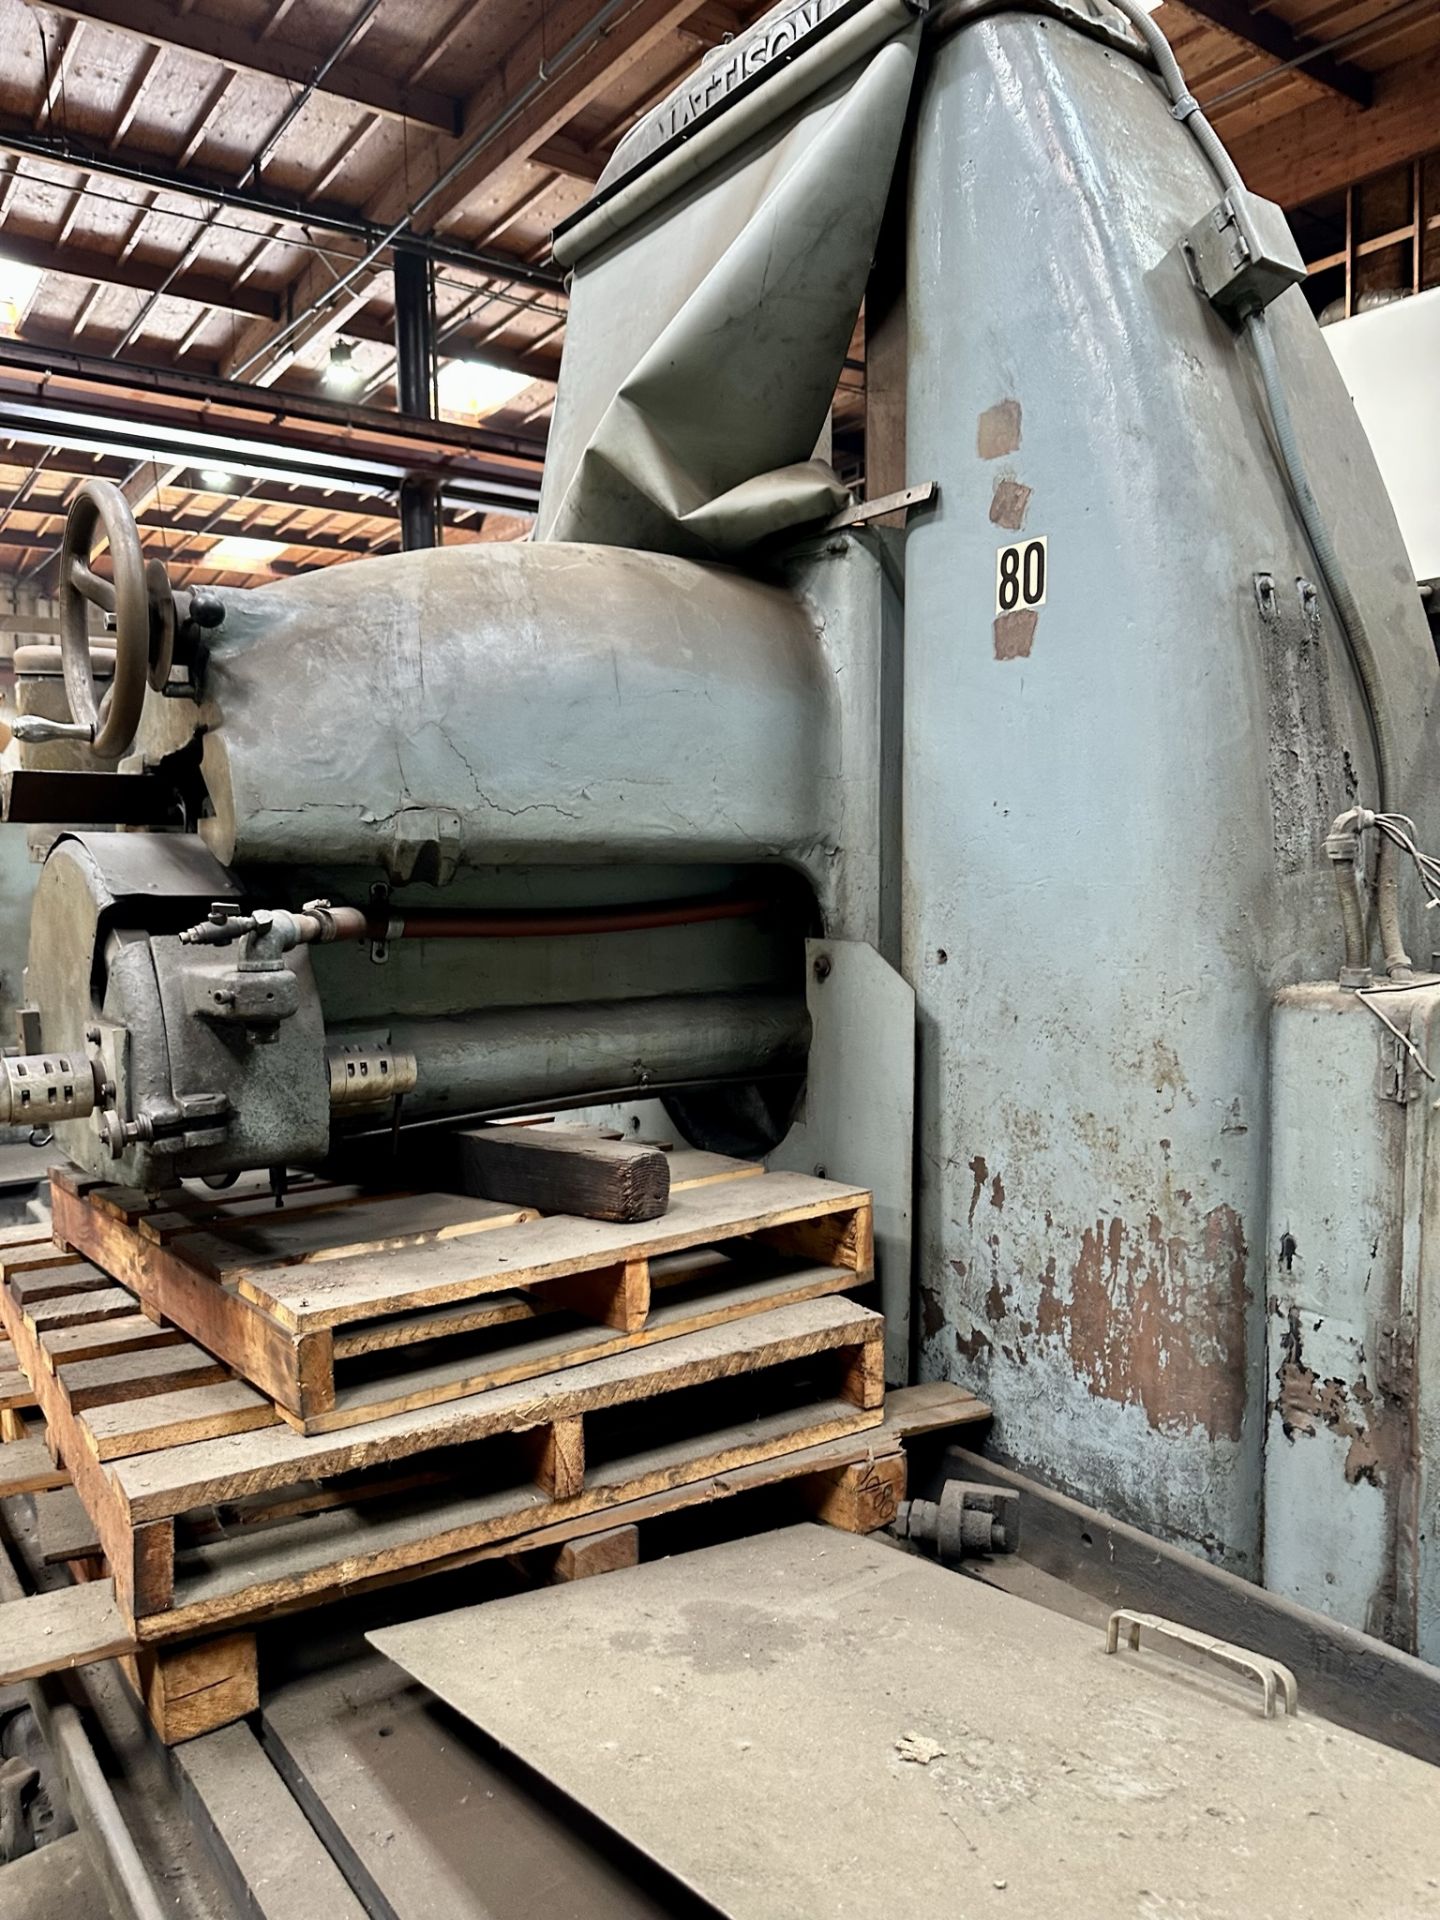 MATTISON SURFACE GRINDER, 104" X 36" WORKING SURFACE, USED, (LOCATION: SANTA FE SPRINGS, CA) - Image 10 of 10